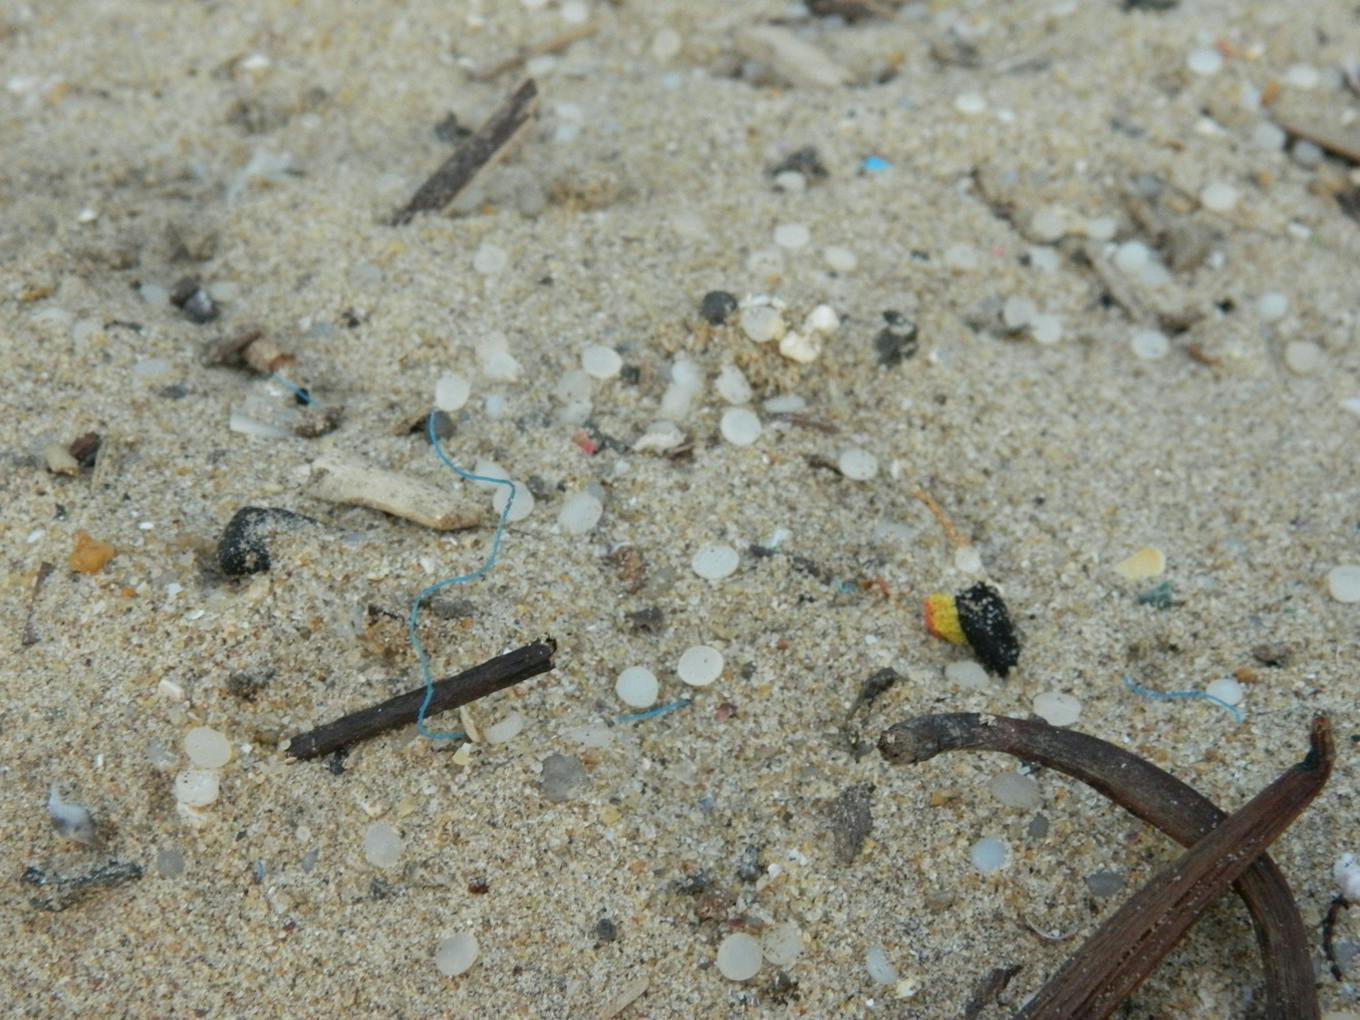 Plastic nurdle found on Colombo beach in the wake of sinking of X-Press vessel